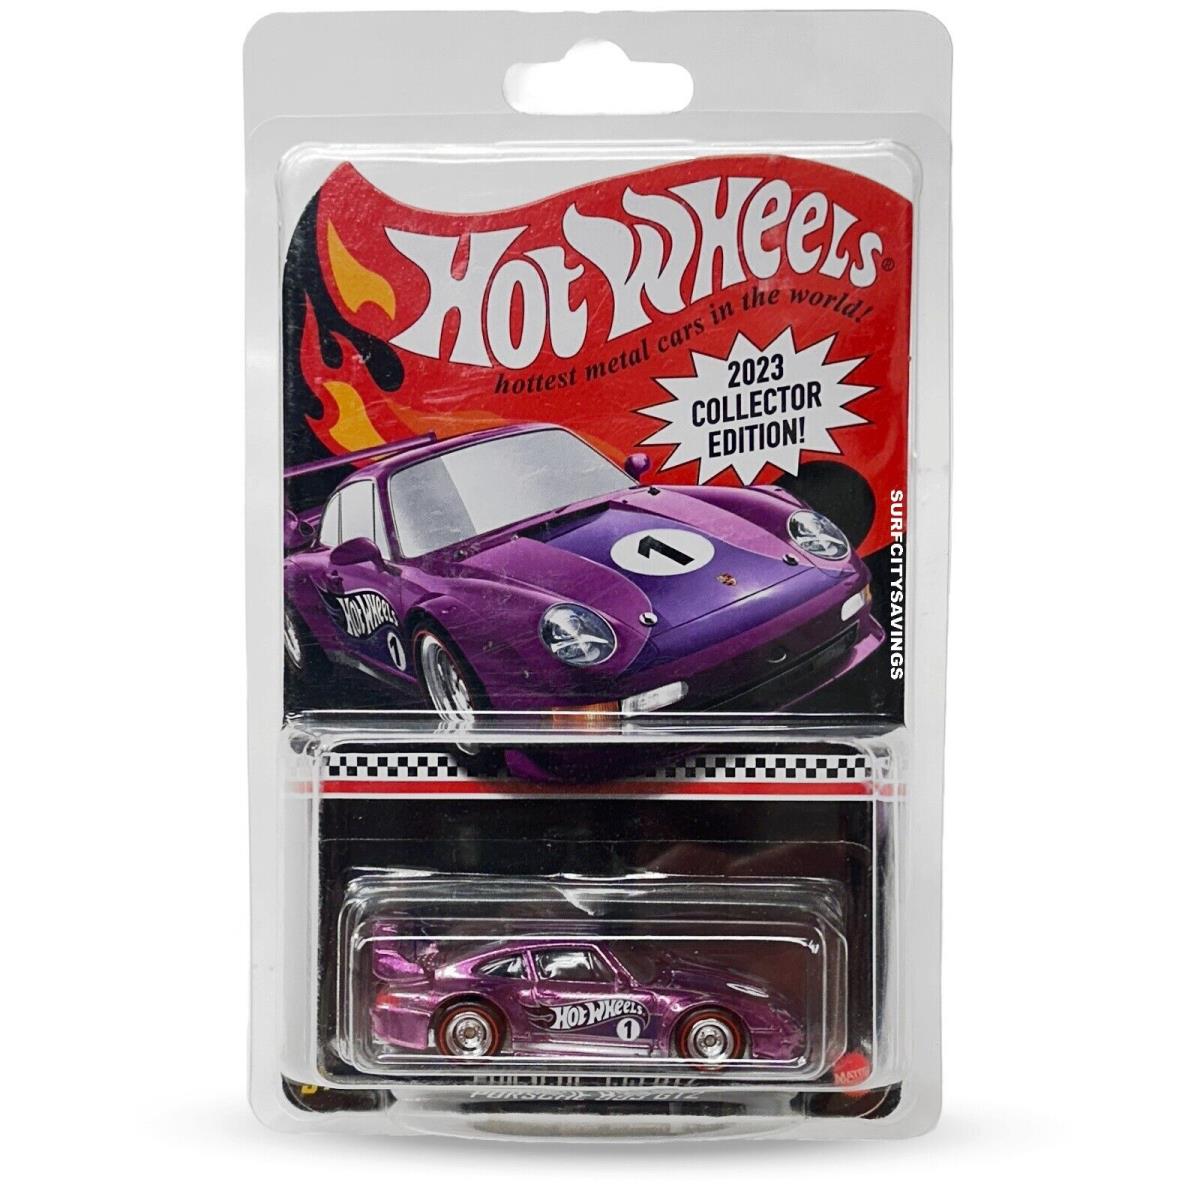 Porsche 993 GT2 Hot Wheels 2023 Collector Edition Purple with Protector